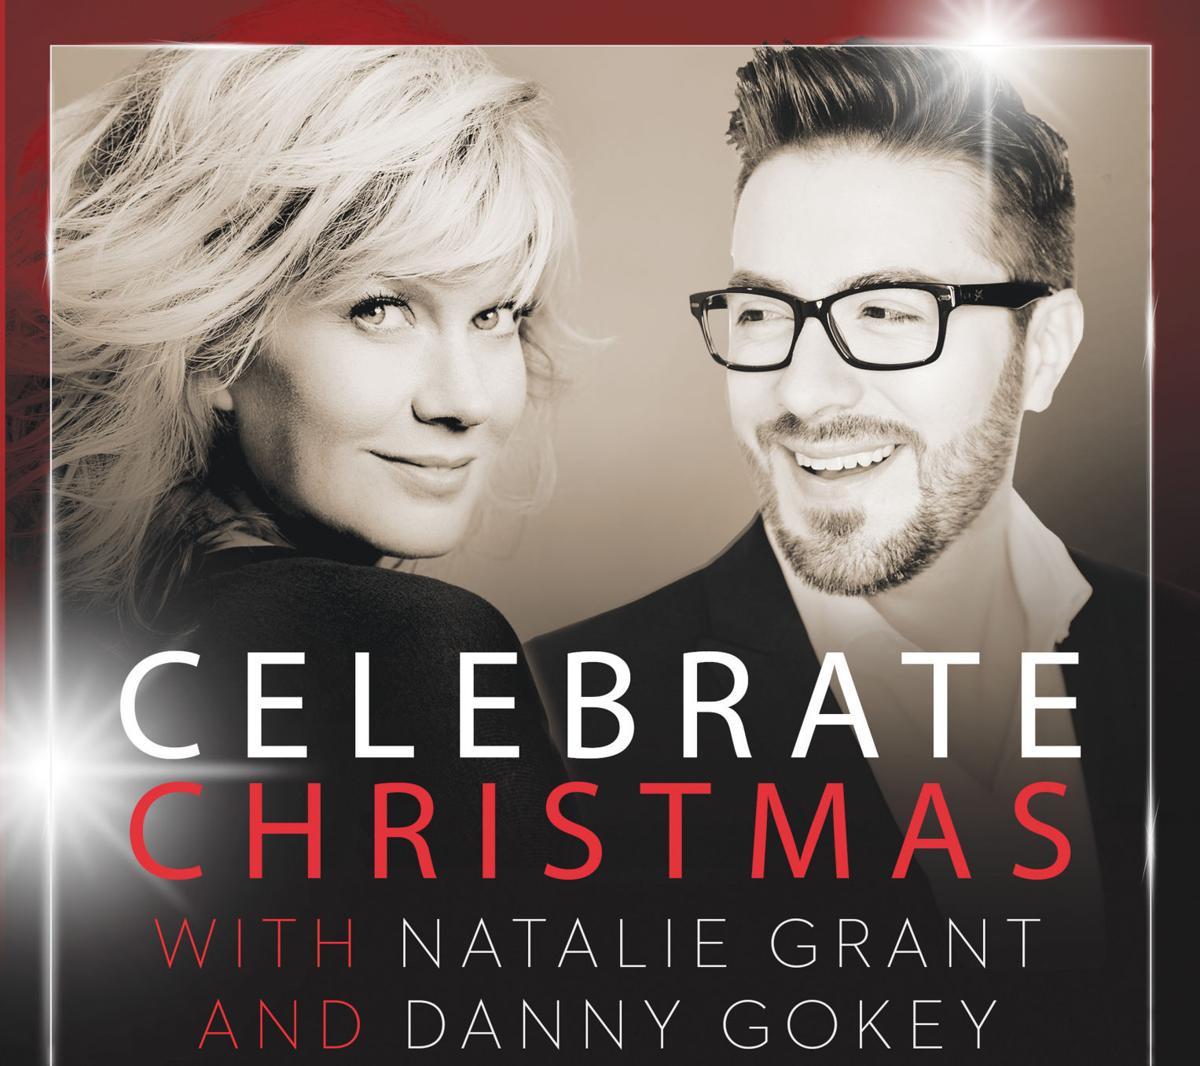 Natalie Grant, Danny Gokey Team Up For Christmas Tour That Stops At